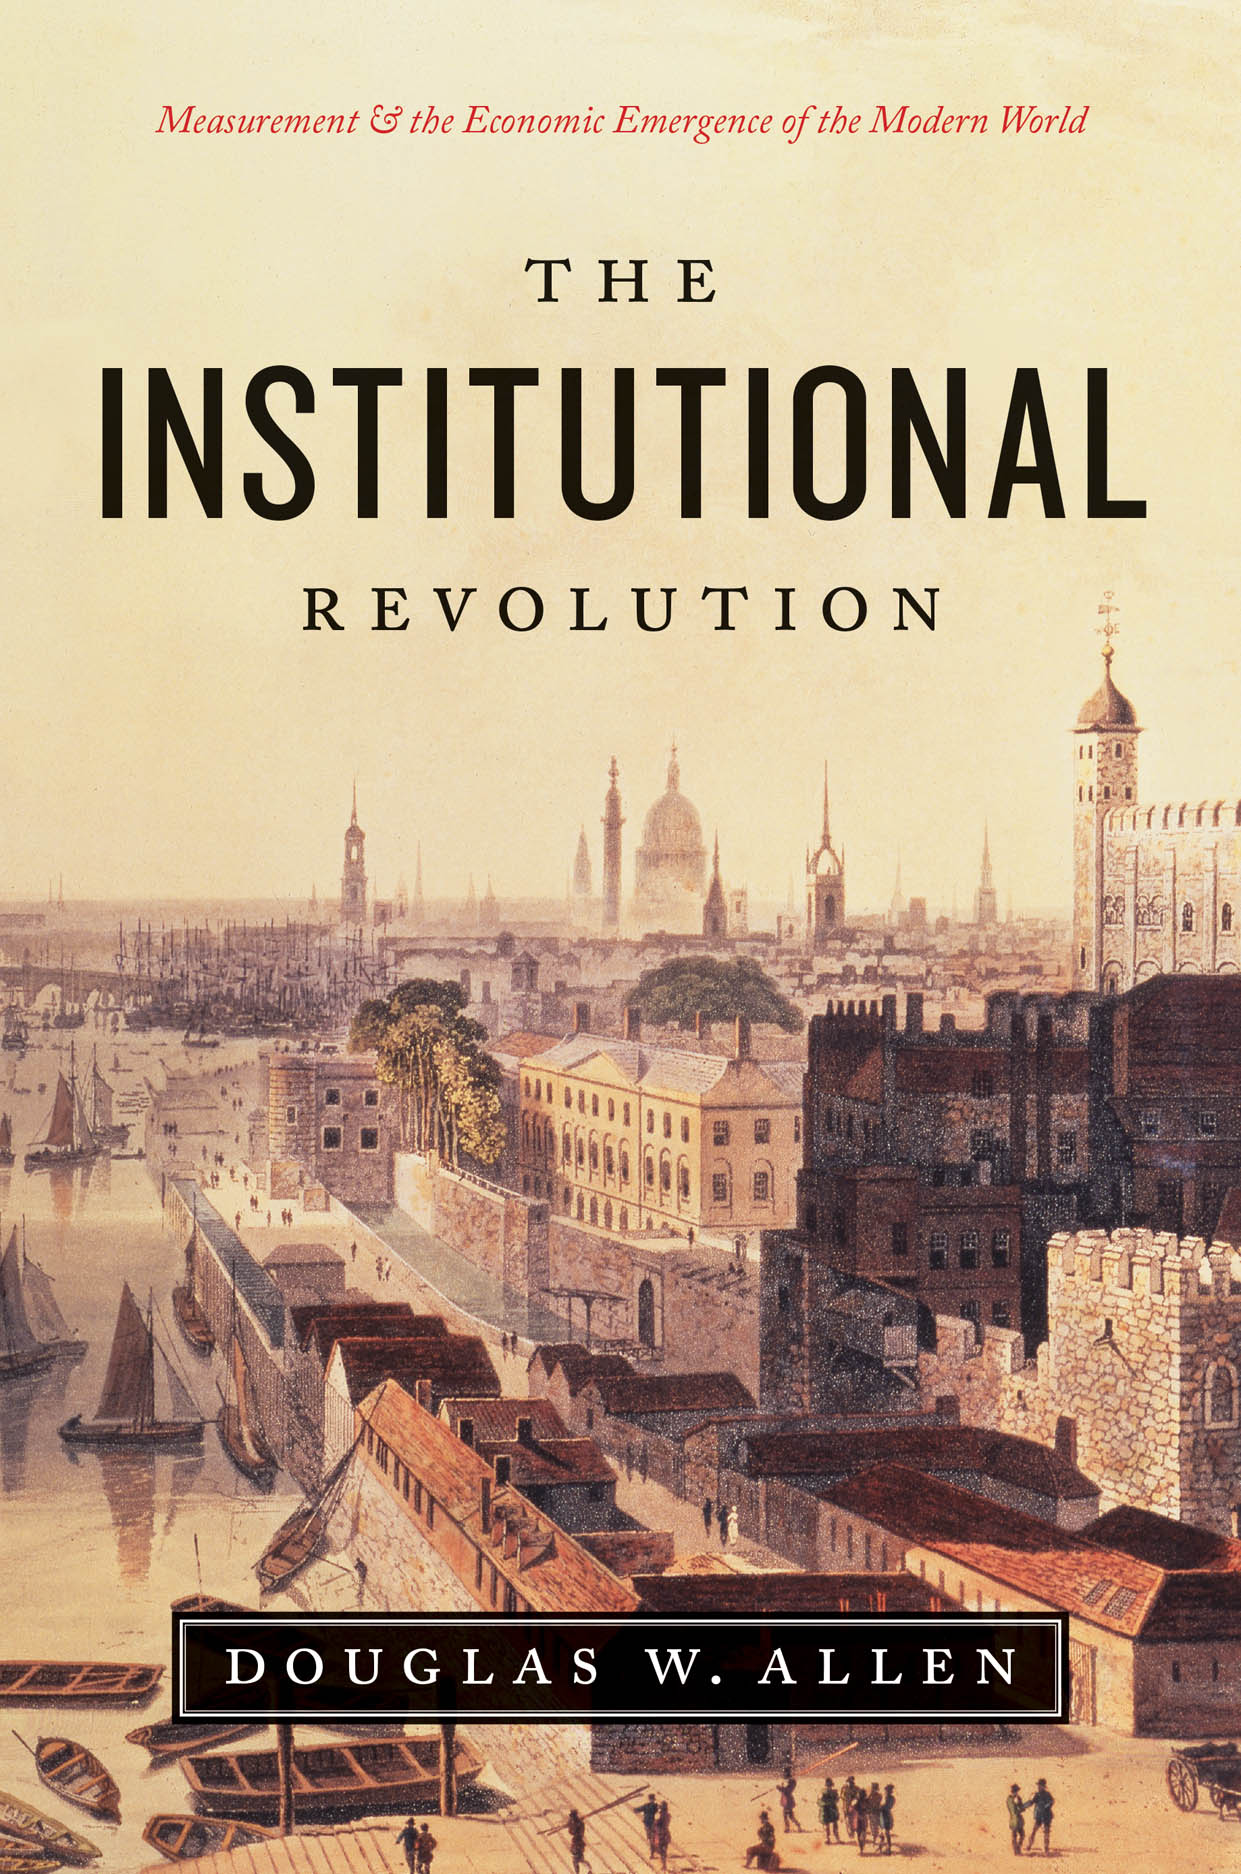 The Institutional Revolution: Measurement and the Economic